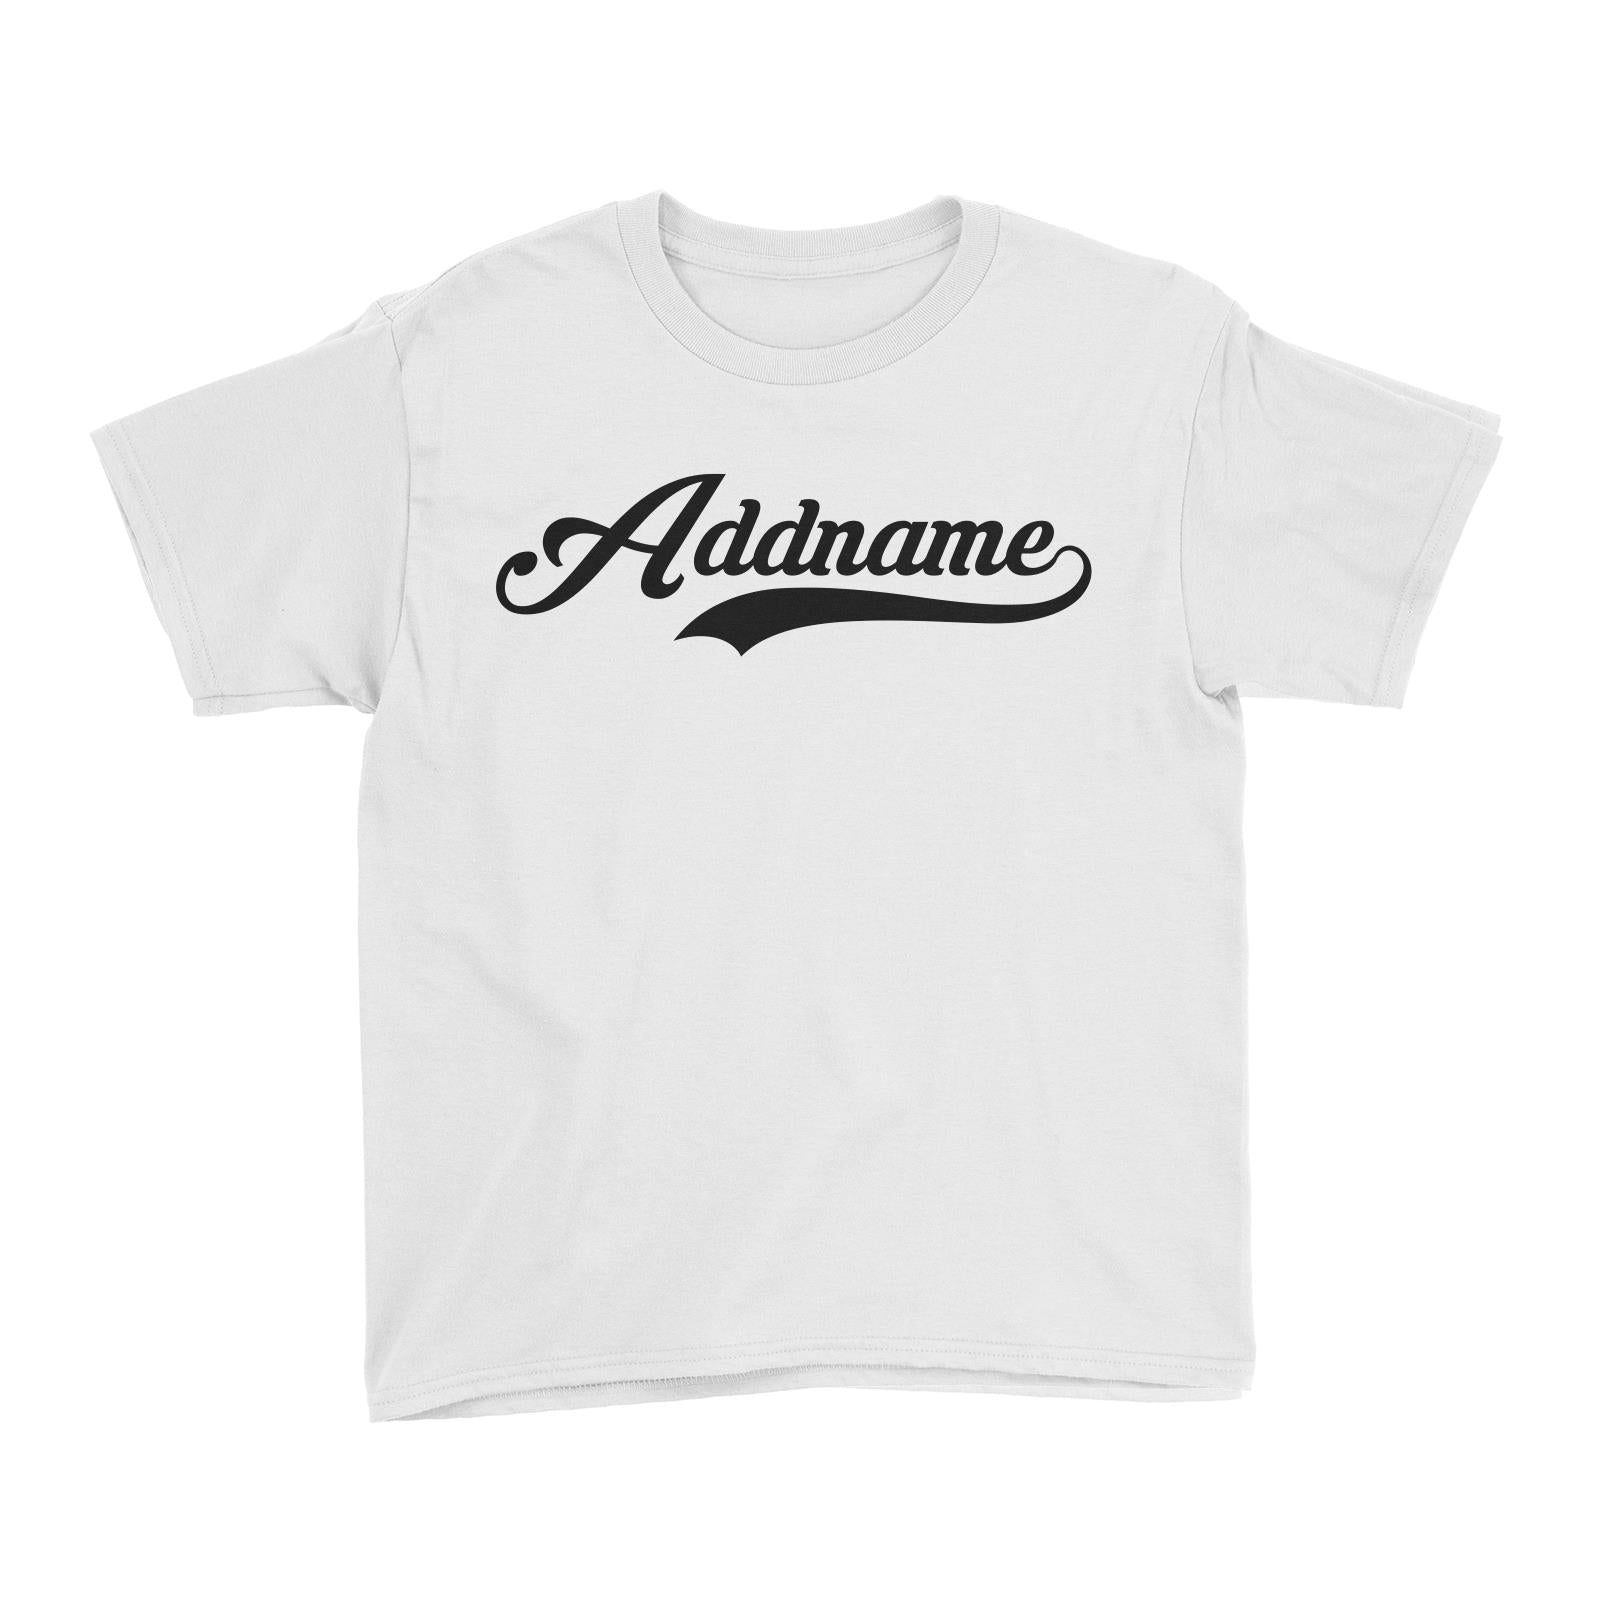 Retro Addname Kid's T-Shirt  Matching Family Personalizable Designs